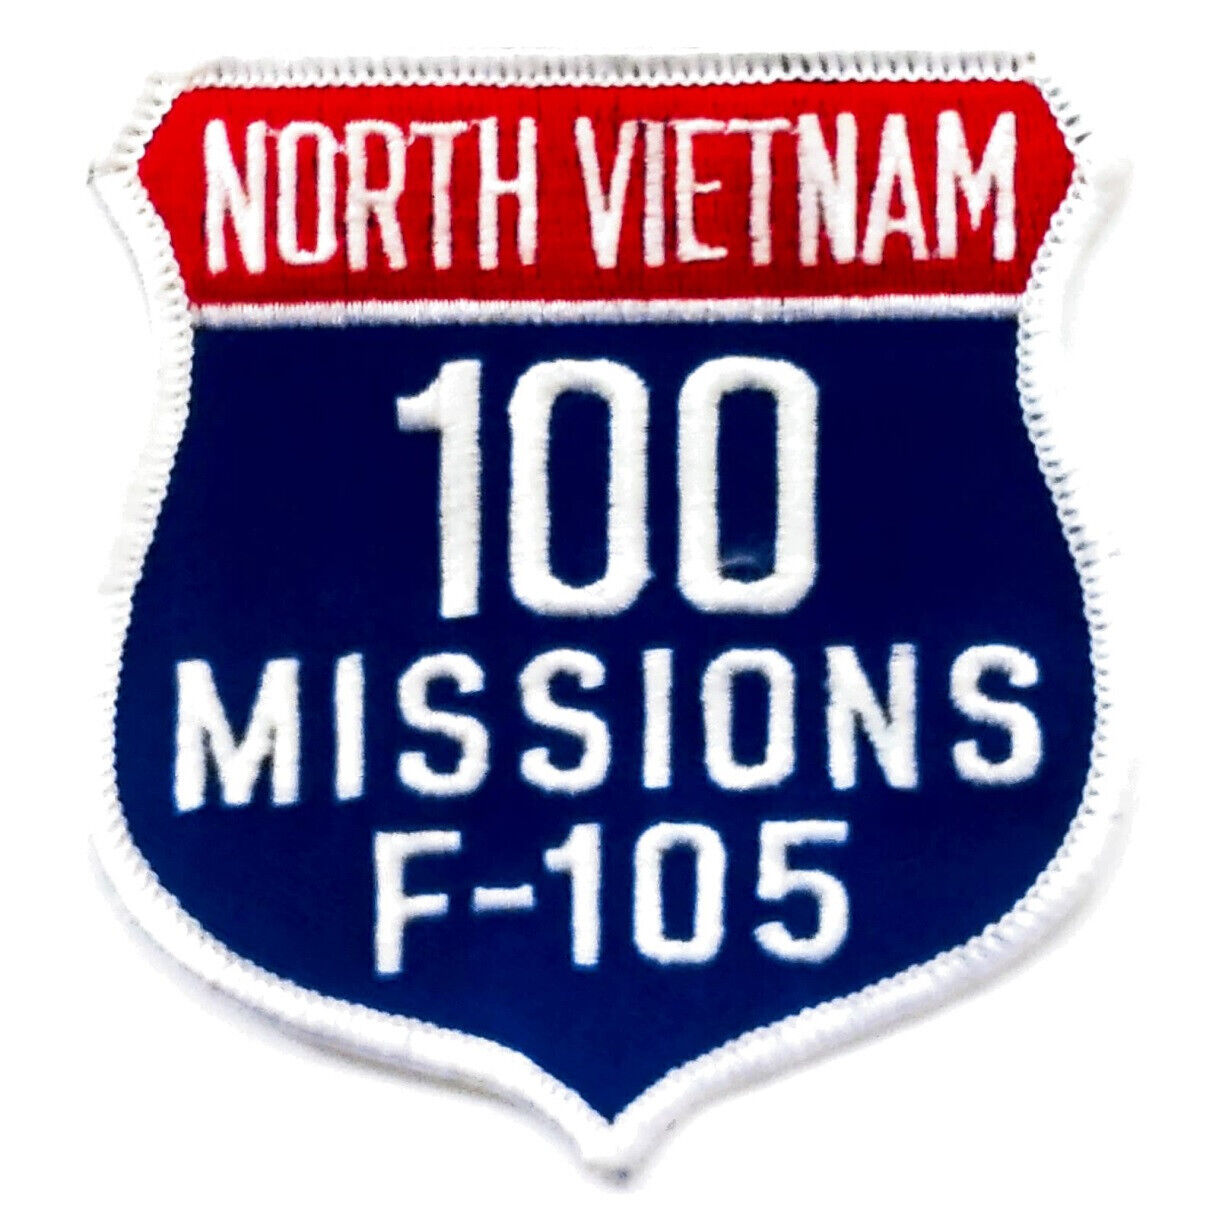 Vintage US Air Force North Vietnam 100 Missions, F-105 Patch